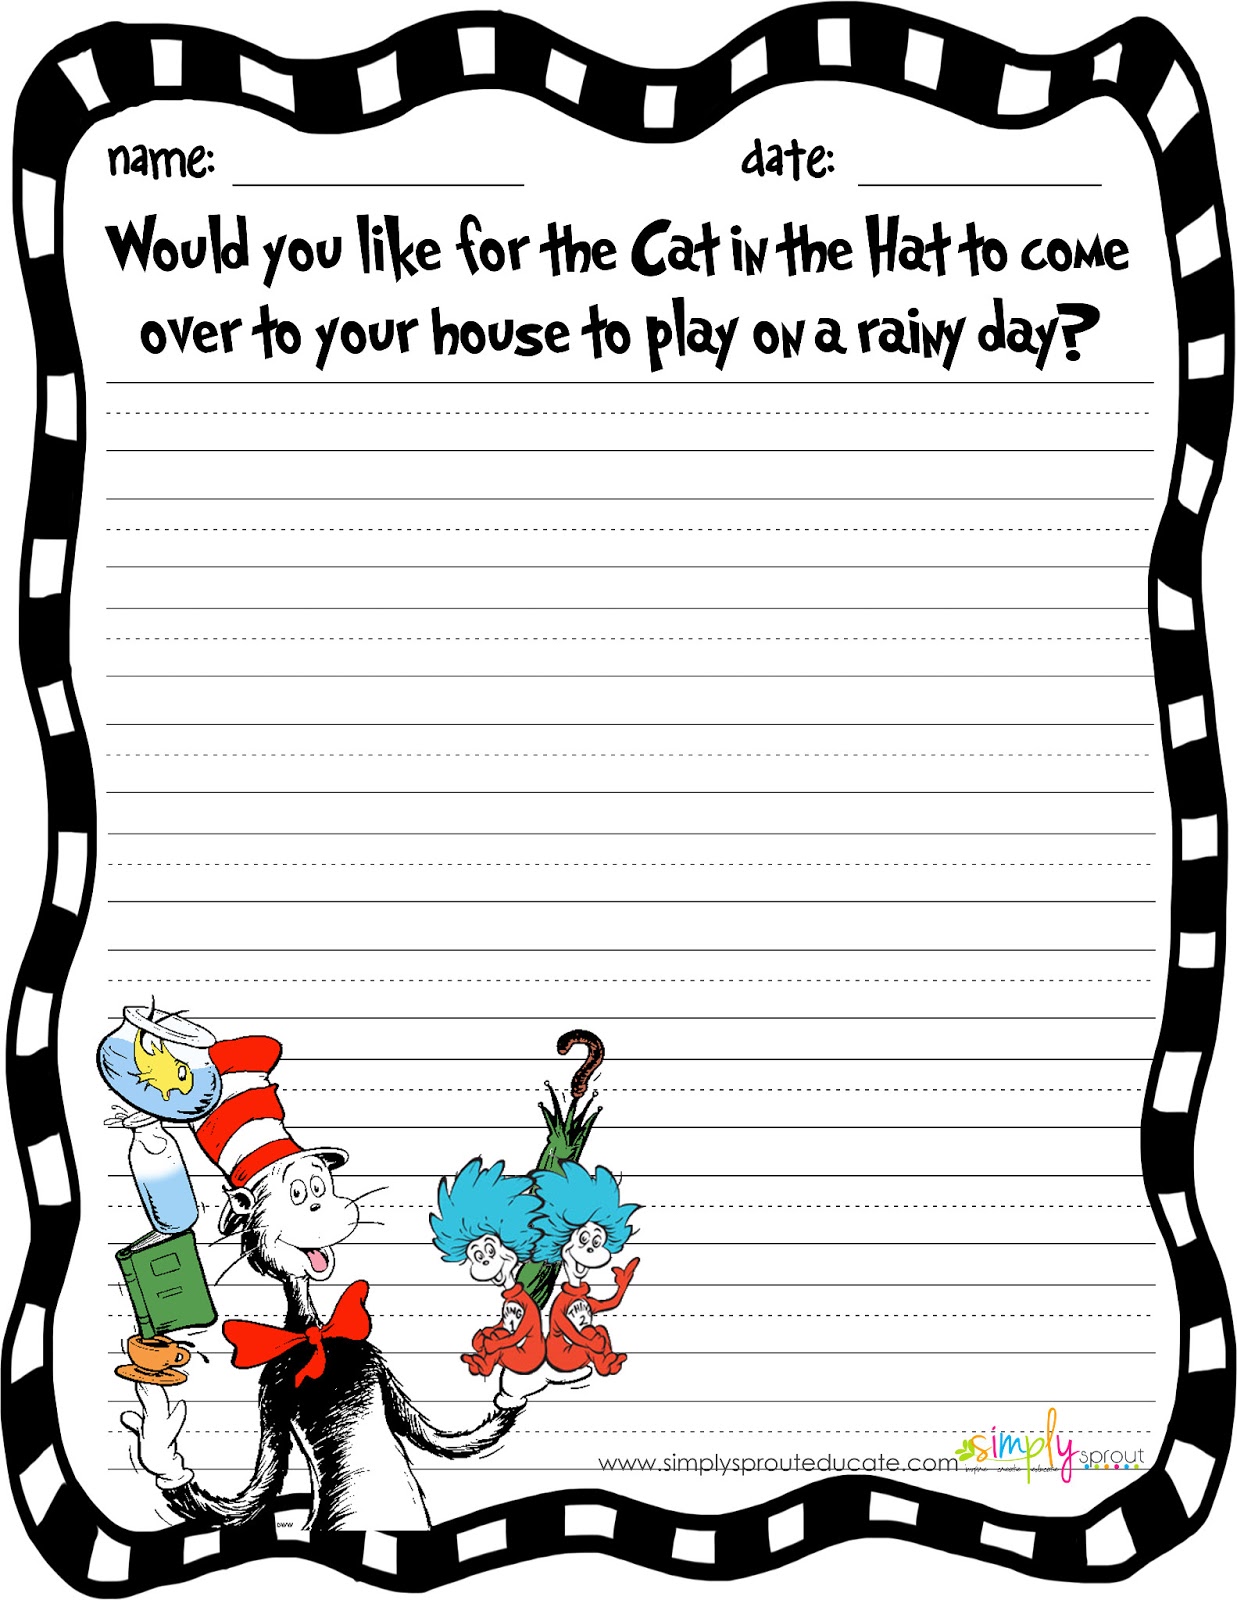 Celebrate Reading with The Cat in the Hat Simply Sprout